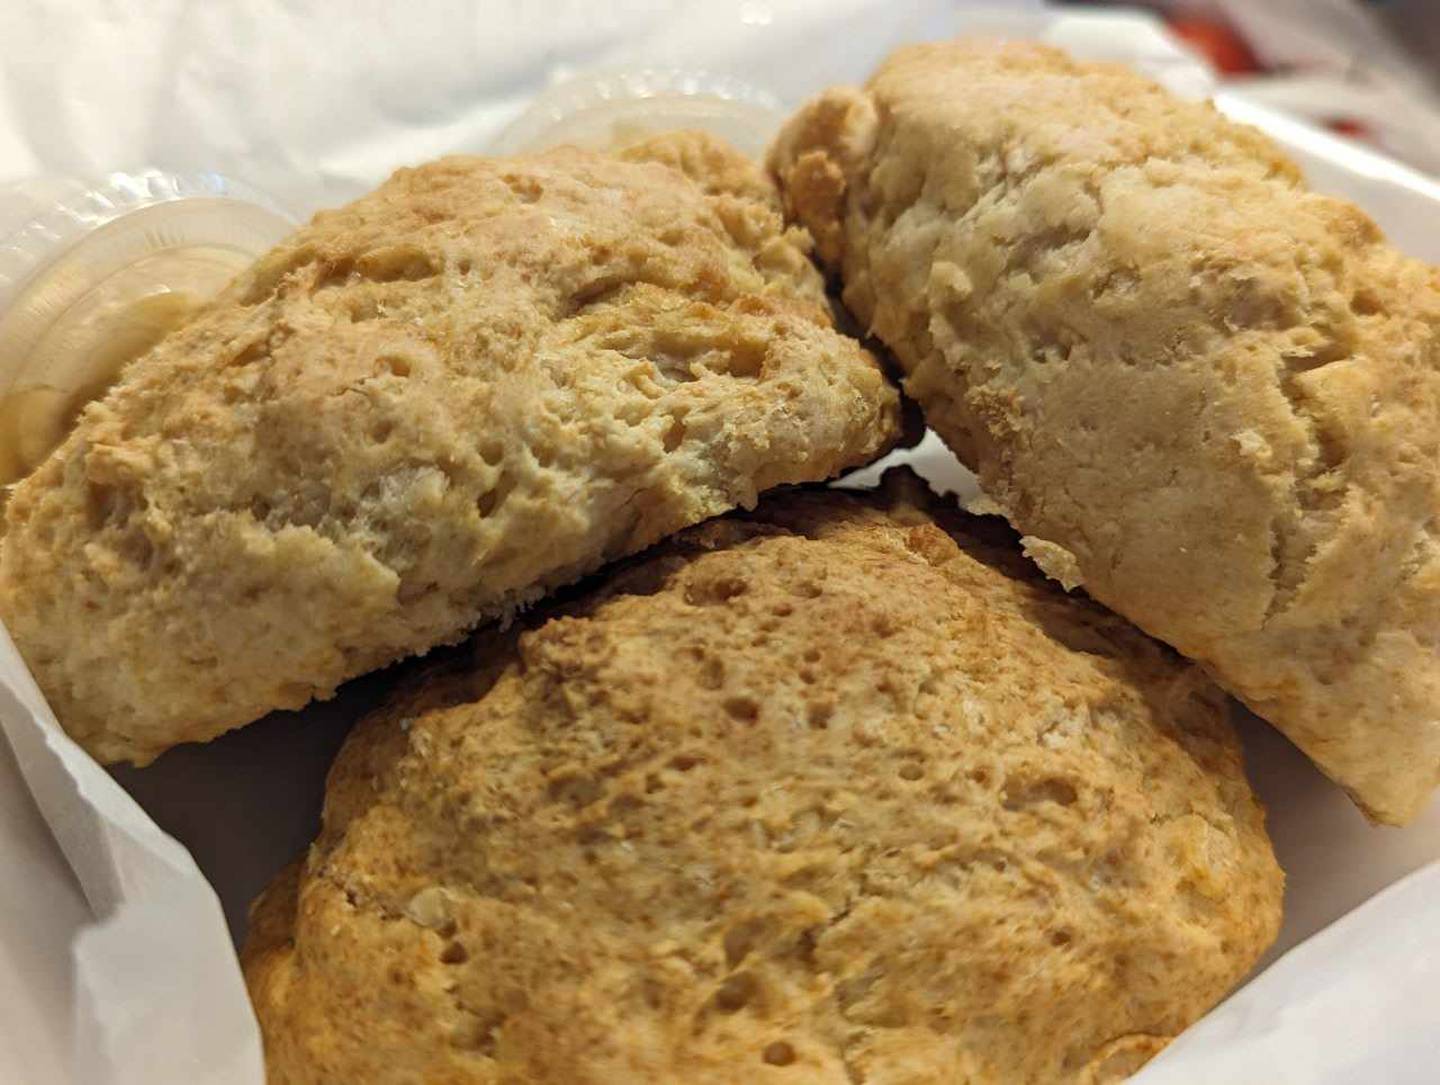 Pictured is a side order of biscuits from the Southern Cafe in Crest Hill. The biscuits were more than twice as large as the typical biscuit and had a homemade texture and taste.